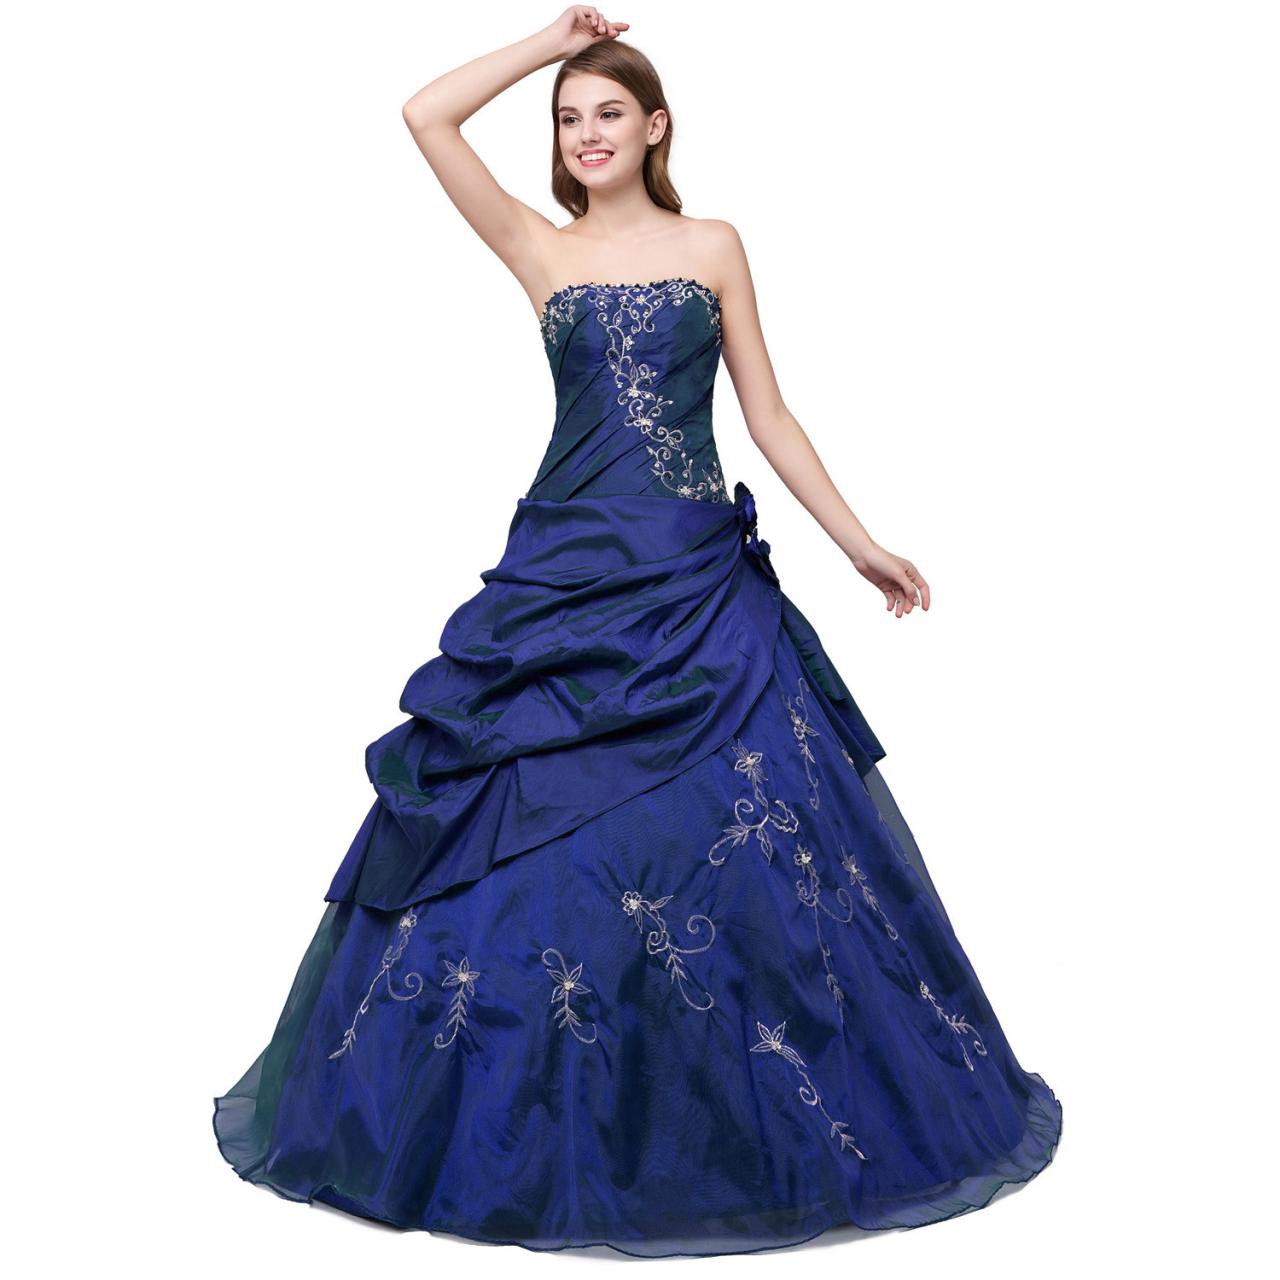 Charming Floor Length Navy Blue Taffeta Prom Gown Featuring Embroidered And Beaded Embellished Sweetheart Bodice, Ball Gown, Formal Dresses